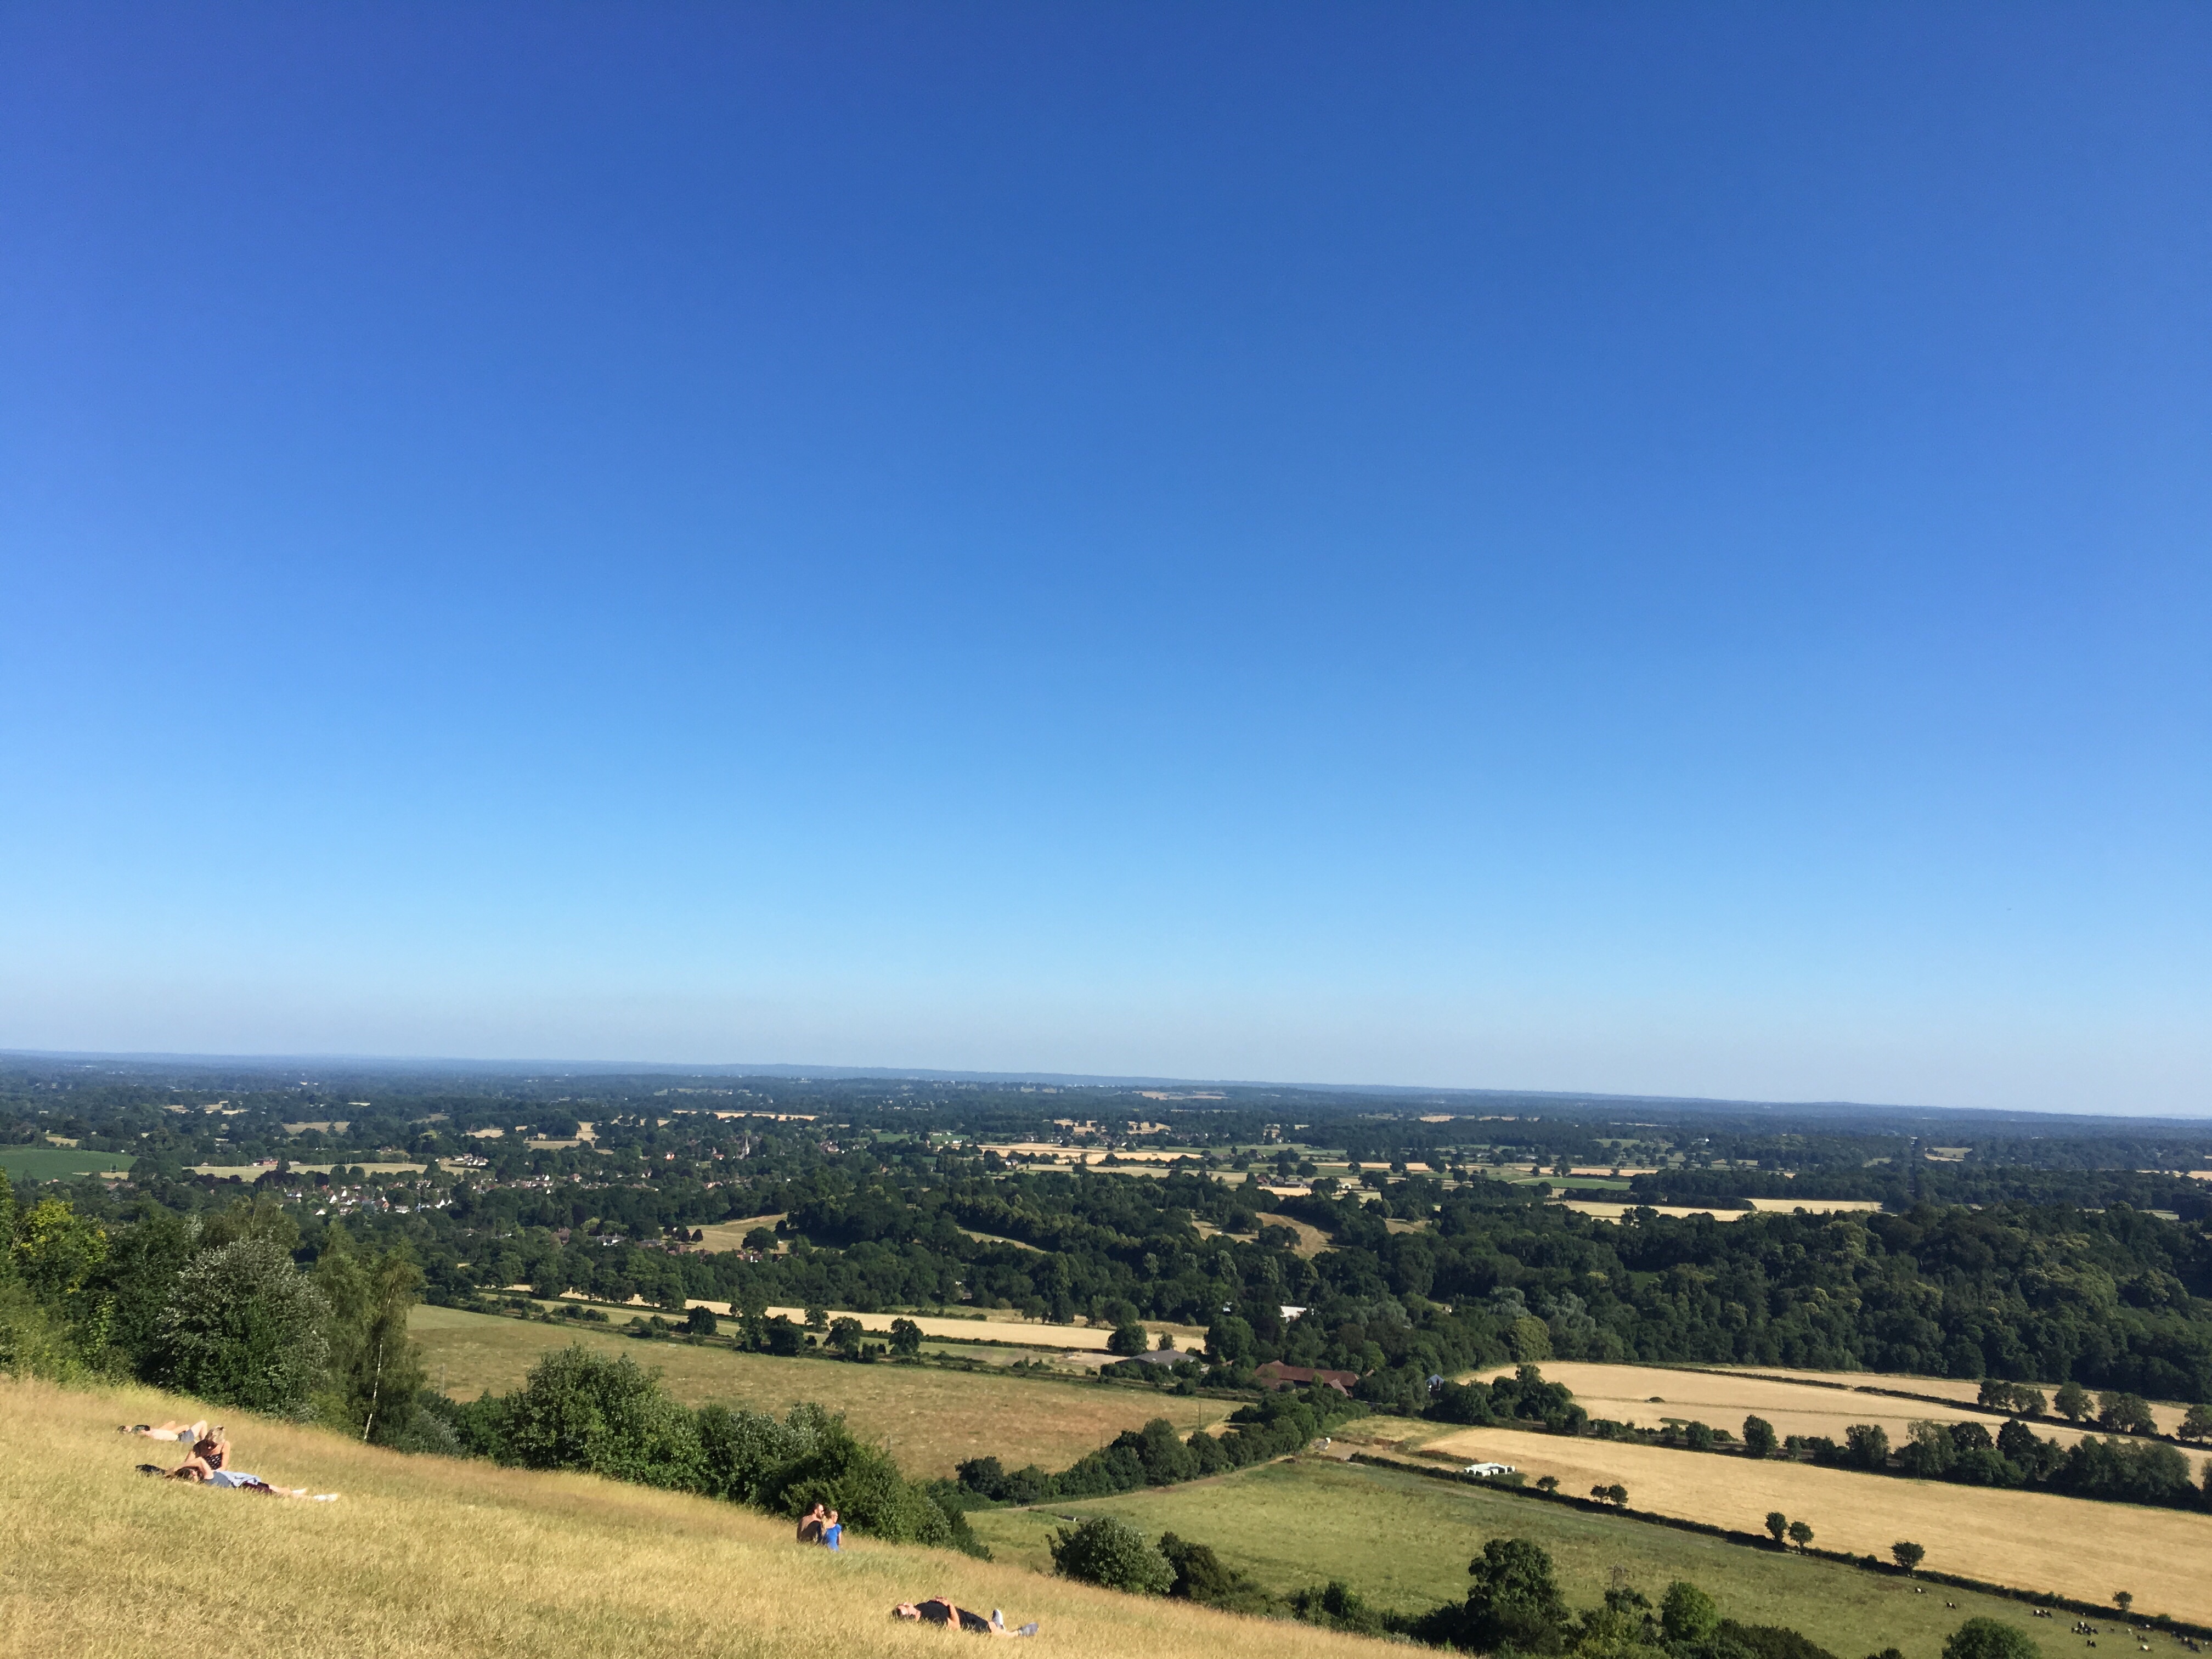 The view from Box Hill - the perfect location for, errr a picnic?!